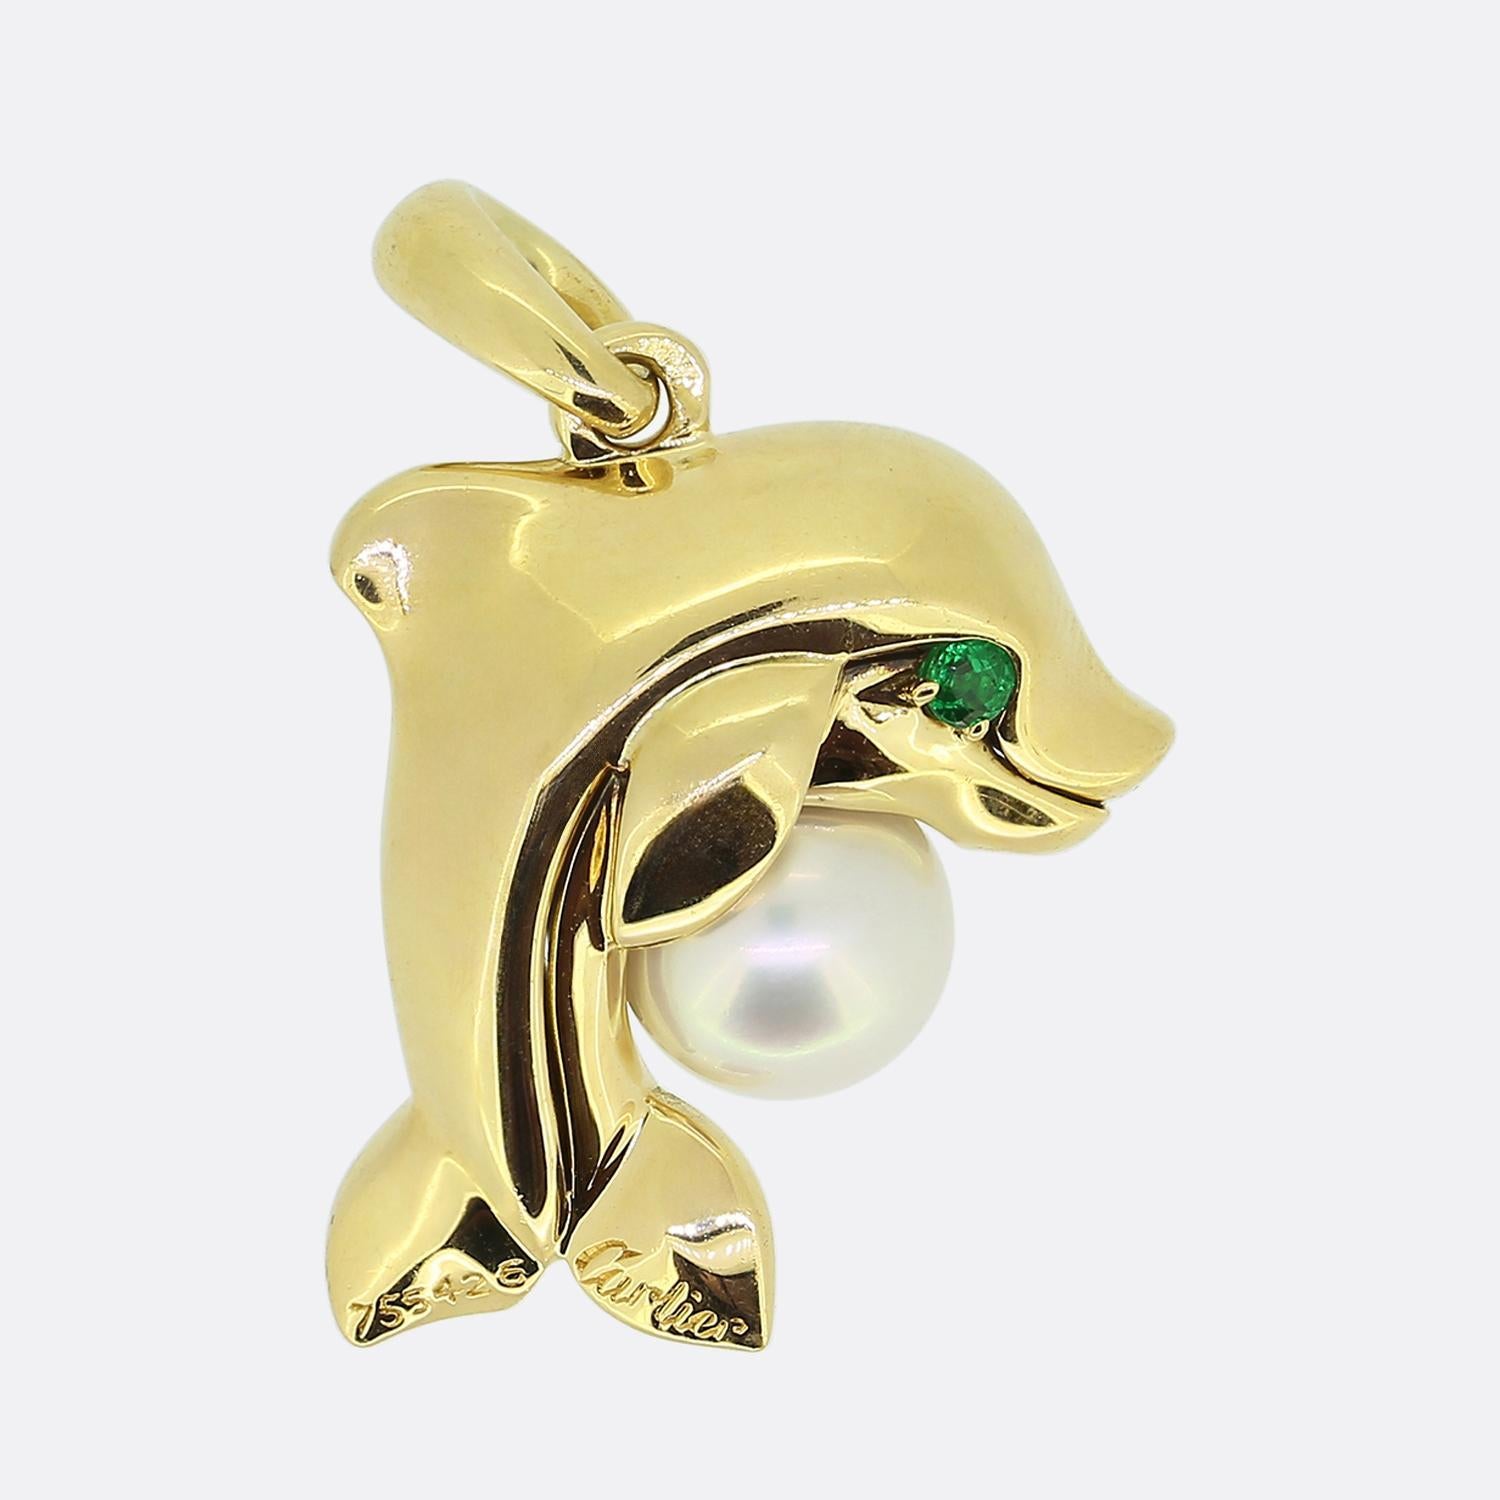 Here we have a charmingly whimsical pendant from the world renowned luxury jewellery house of Cartier. This piece has been crafted from 18ct yellow gold into the shape of a plump dolphin surmounting a round shaped pearl possessing a lovely level of